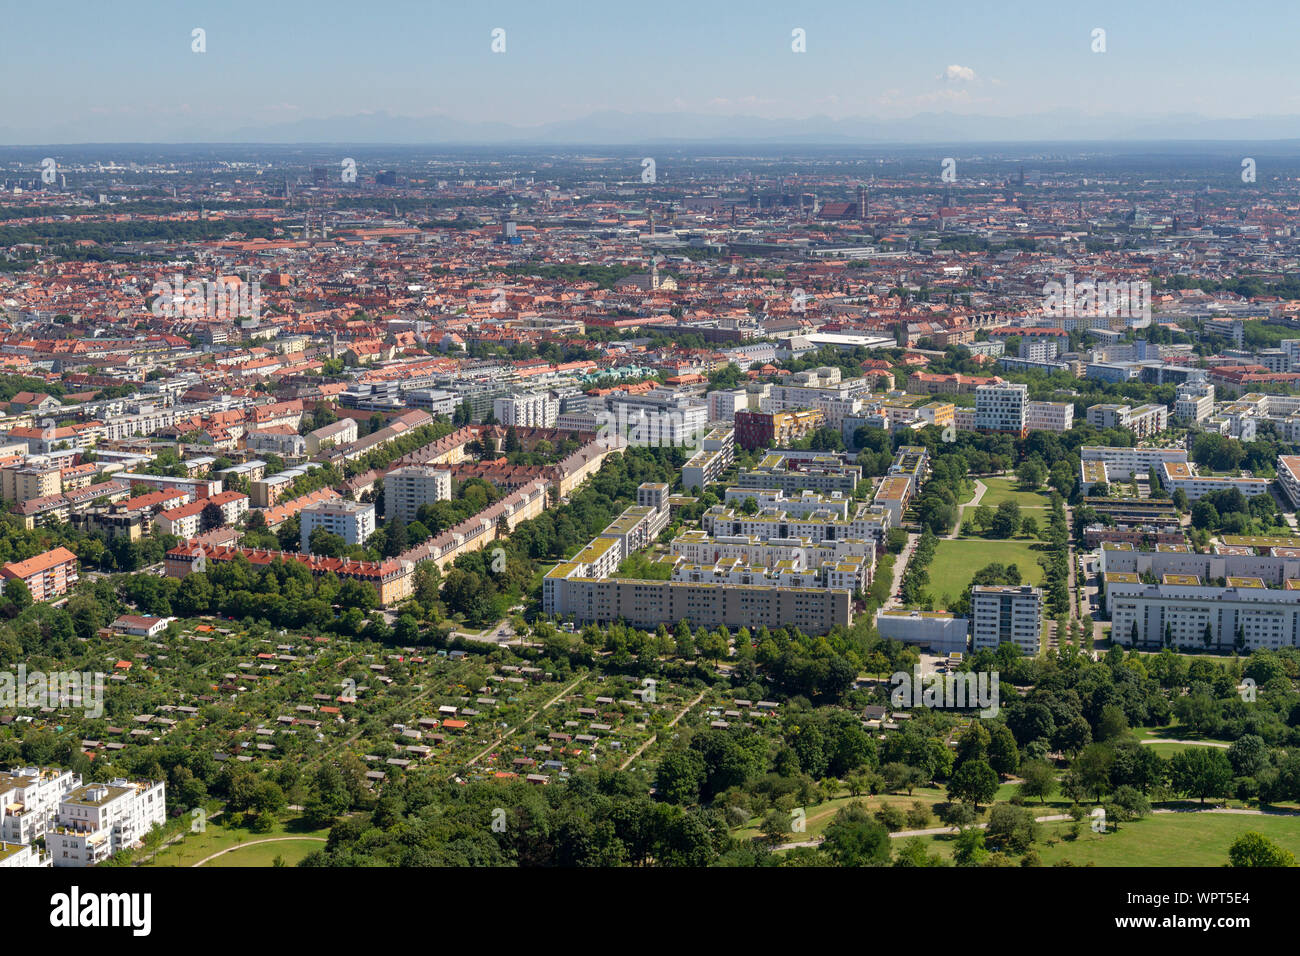 General view across allotment gardens and housing south east of the Olympiaturm (Olympic Tower), Munich, Bavaria, Germany. Stock Photo